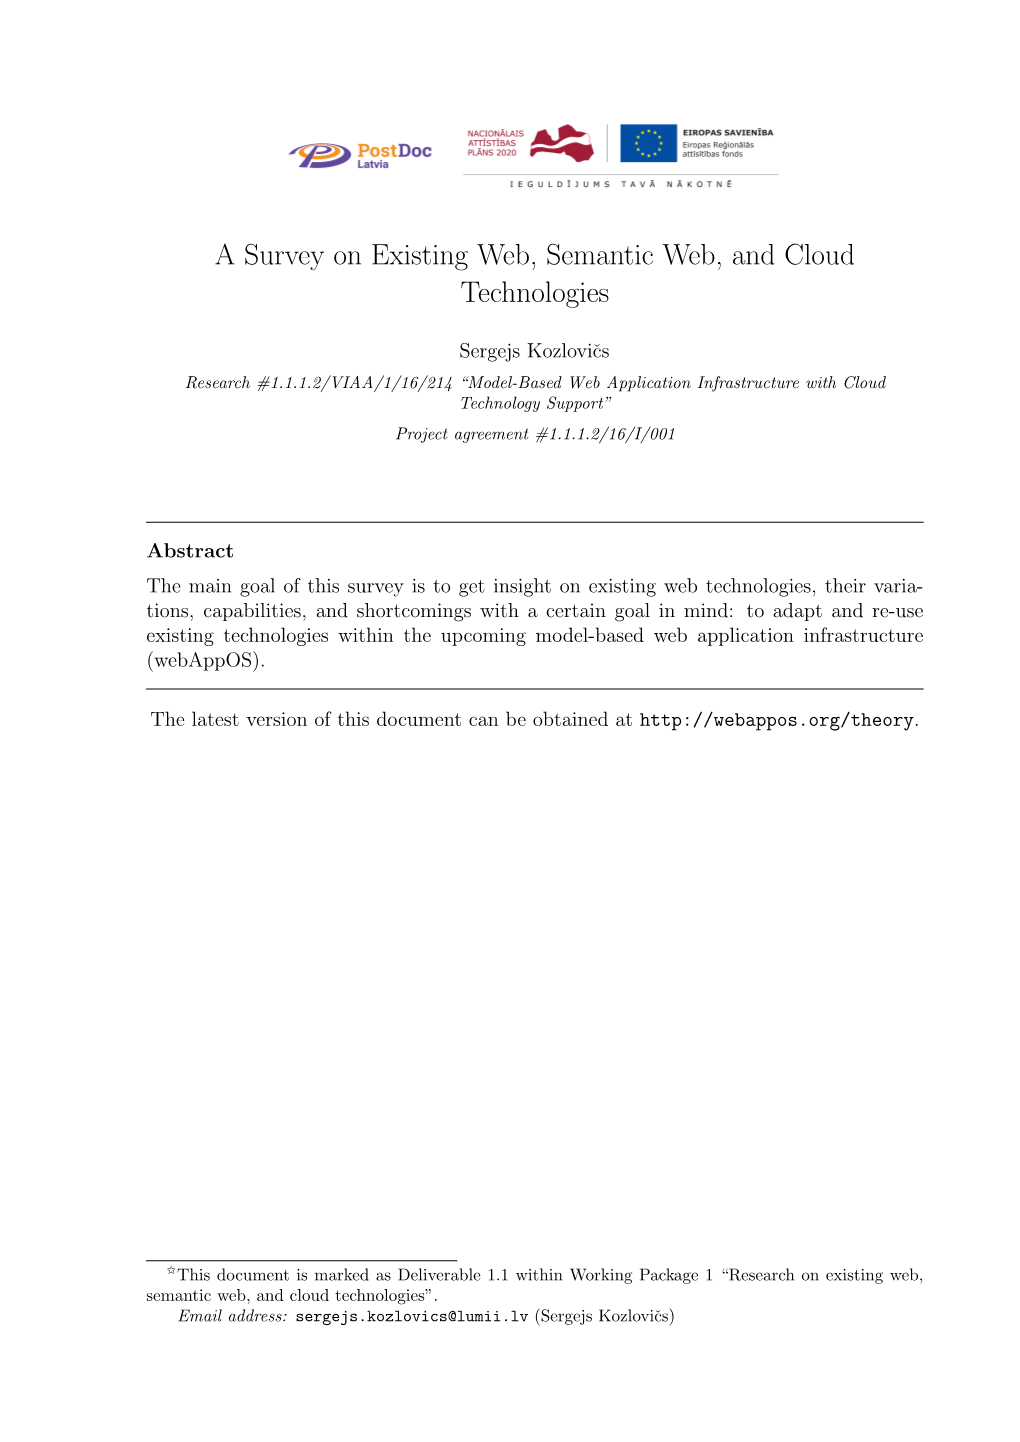 A Survey on Existing Web, Semantic Web, and Cloud Technologies